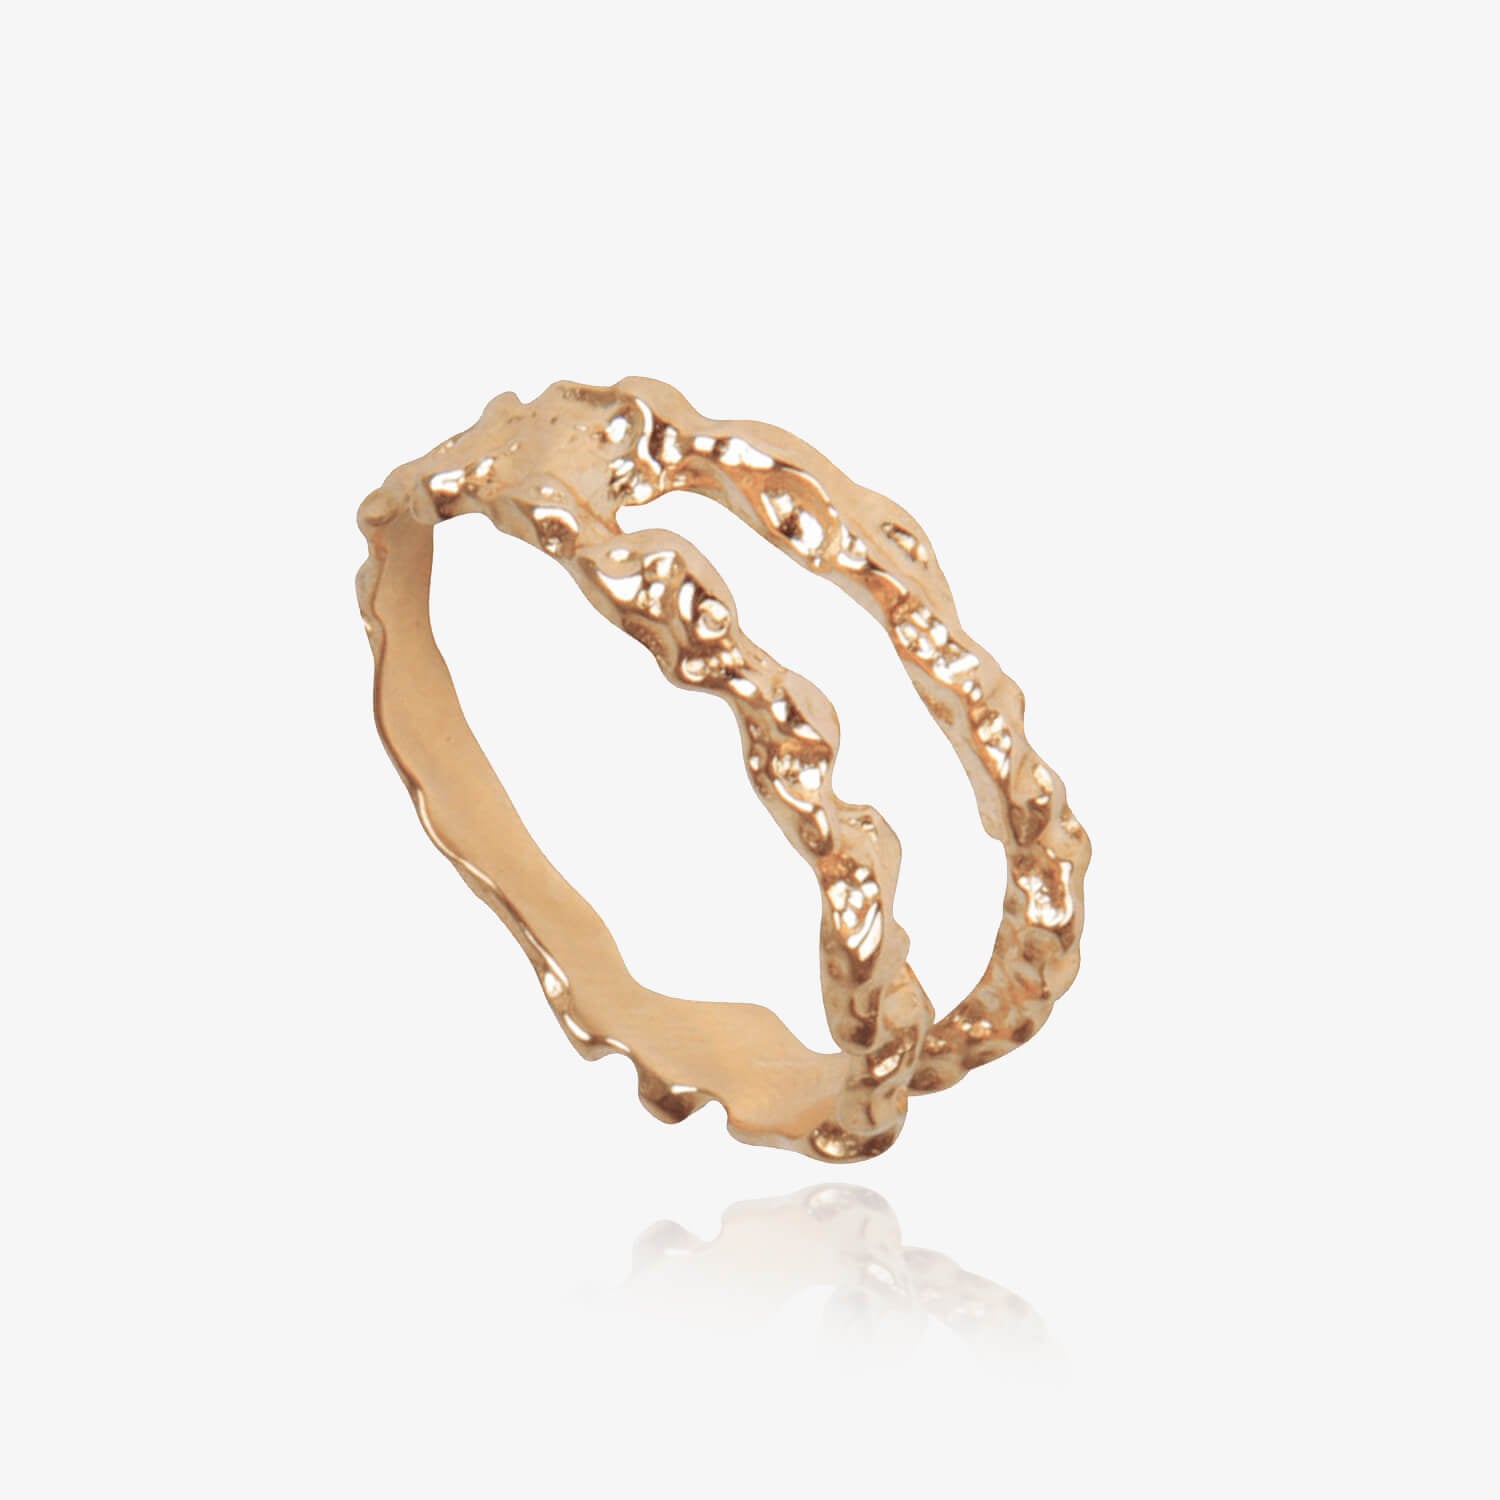 Double Meteor Ring in rose gold by Matthew Calvin Jewellery